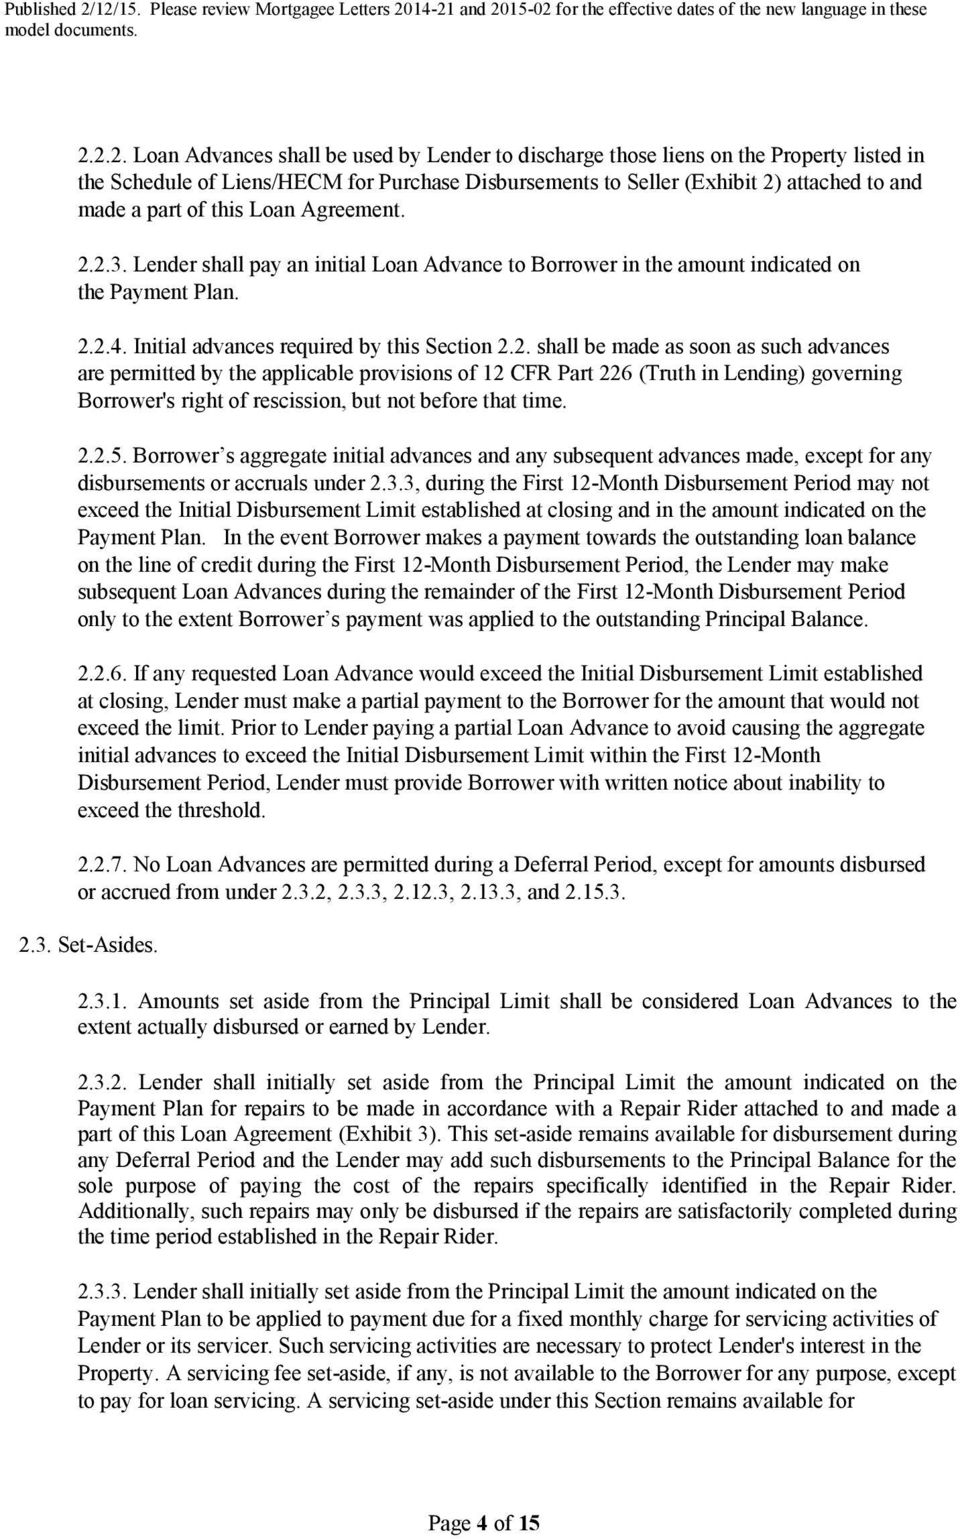 2.3. Lender shall pay an initial Loan Advance to Borrower in the amount indicated on the Payment Plan. 2.2.4. Initial advances required by this Section 2.2. shall be made as soon as such advances are permitted by the applicable provisions of 12 CFR Part 226 (Truth in Lending) governing Borrower's right of rescission, but not before that time.